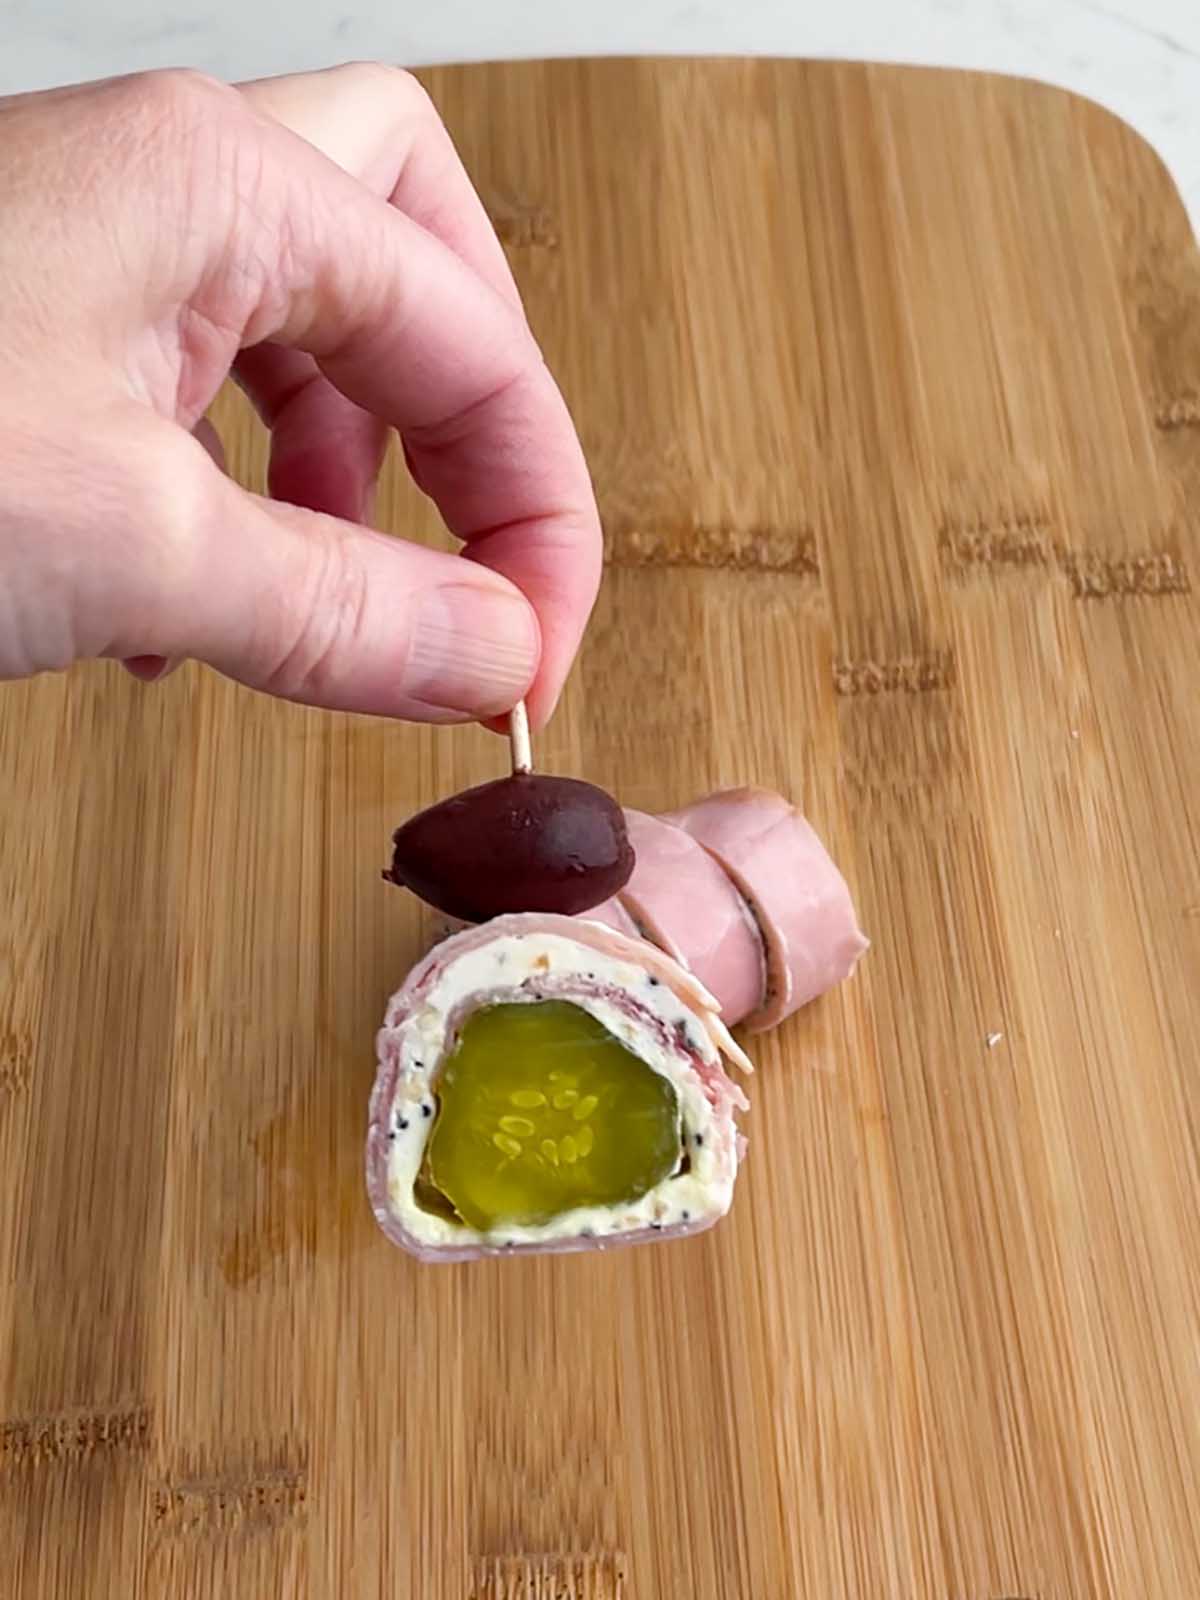 hand holding a ham pickle roll with an olive on top